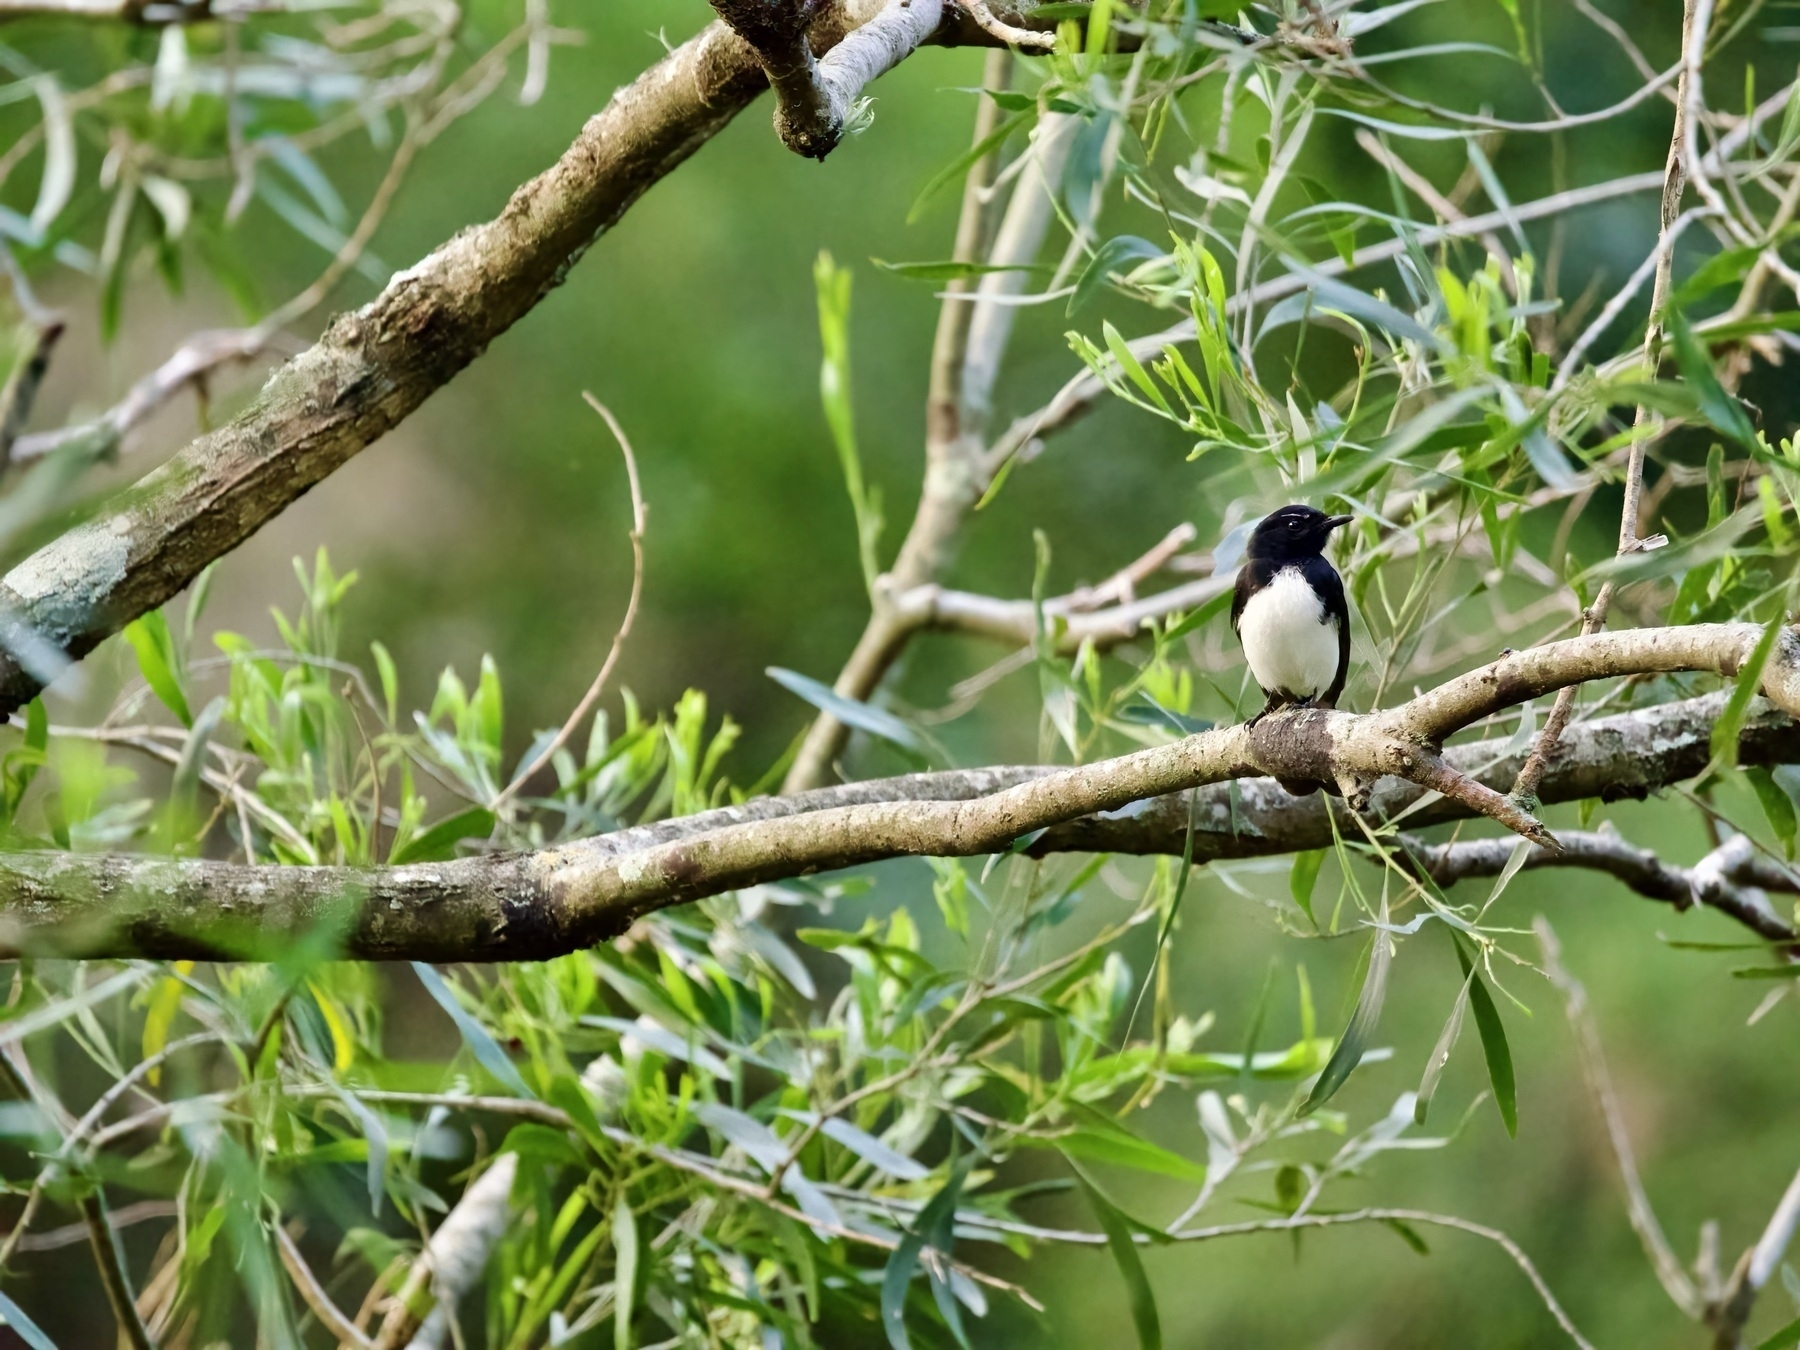 A willie wagtail sits on a tree branch.